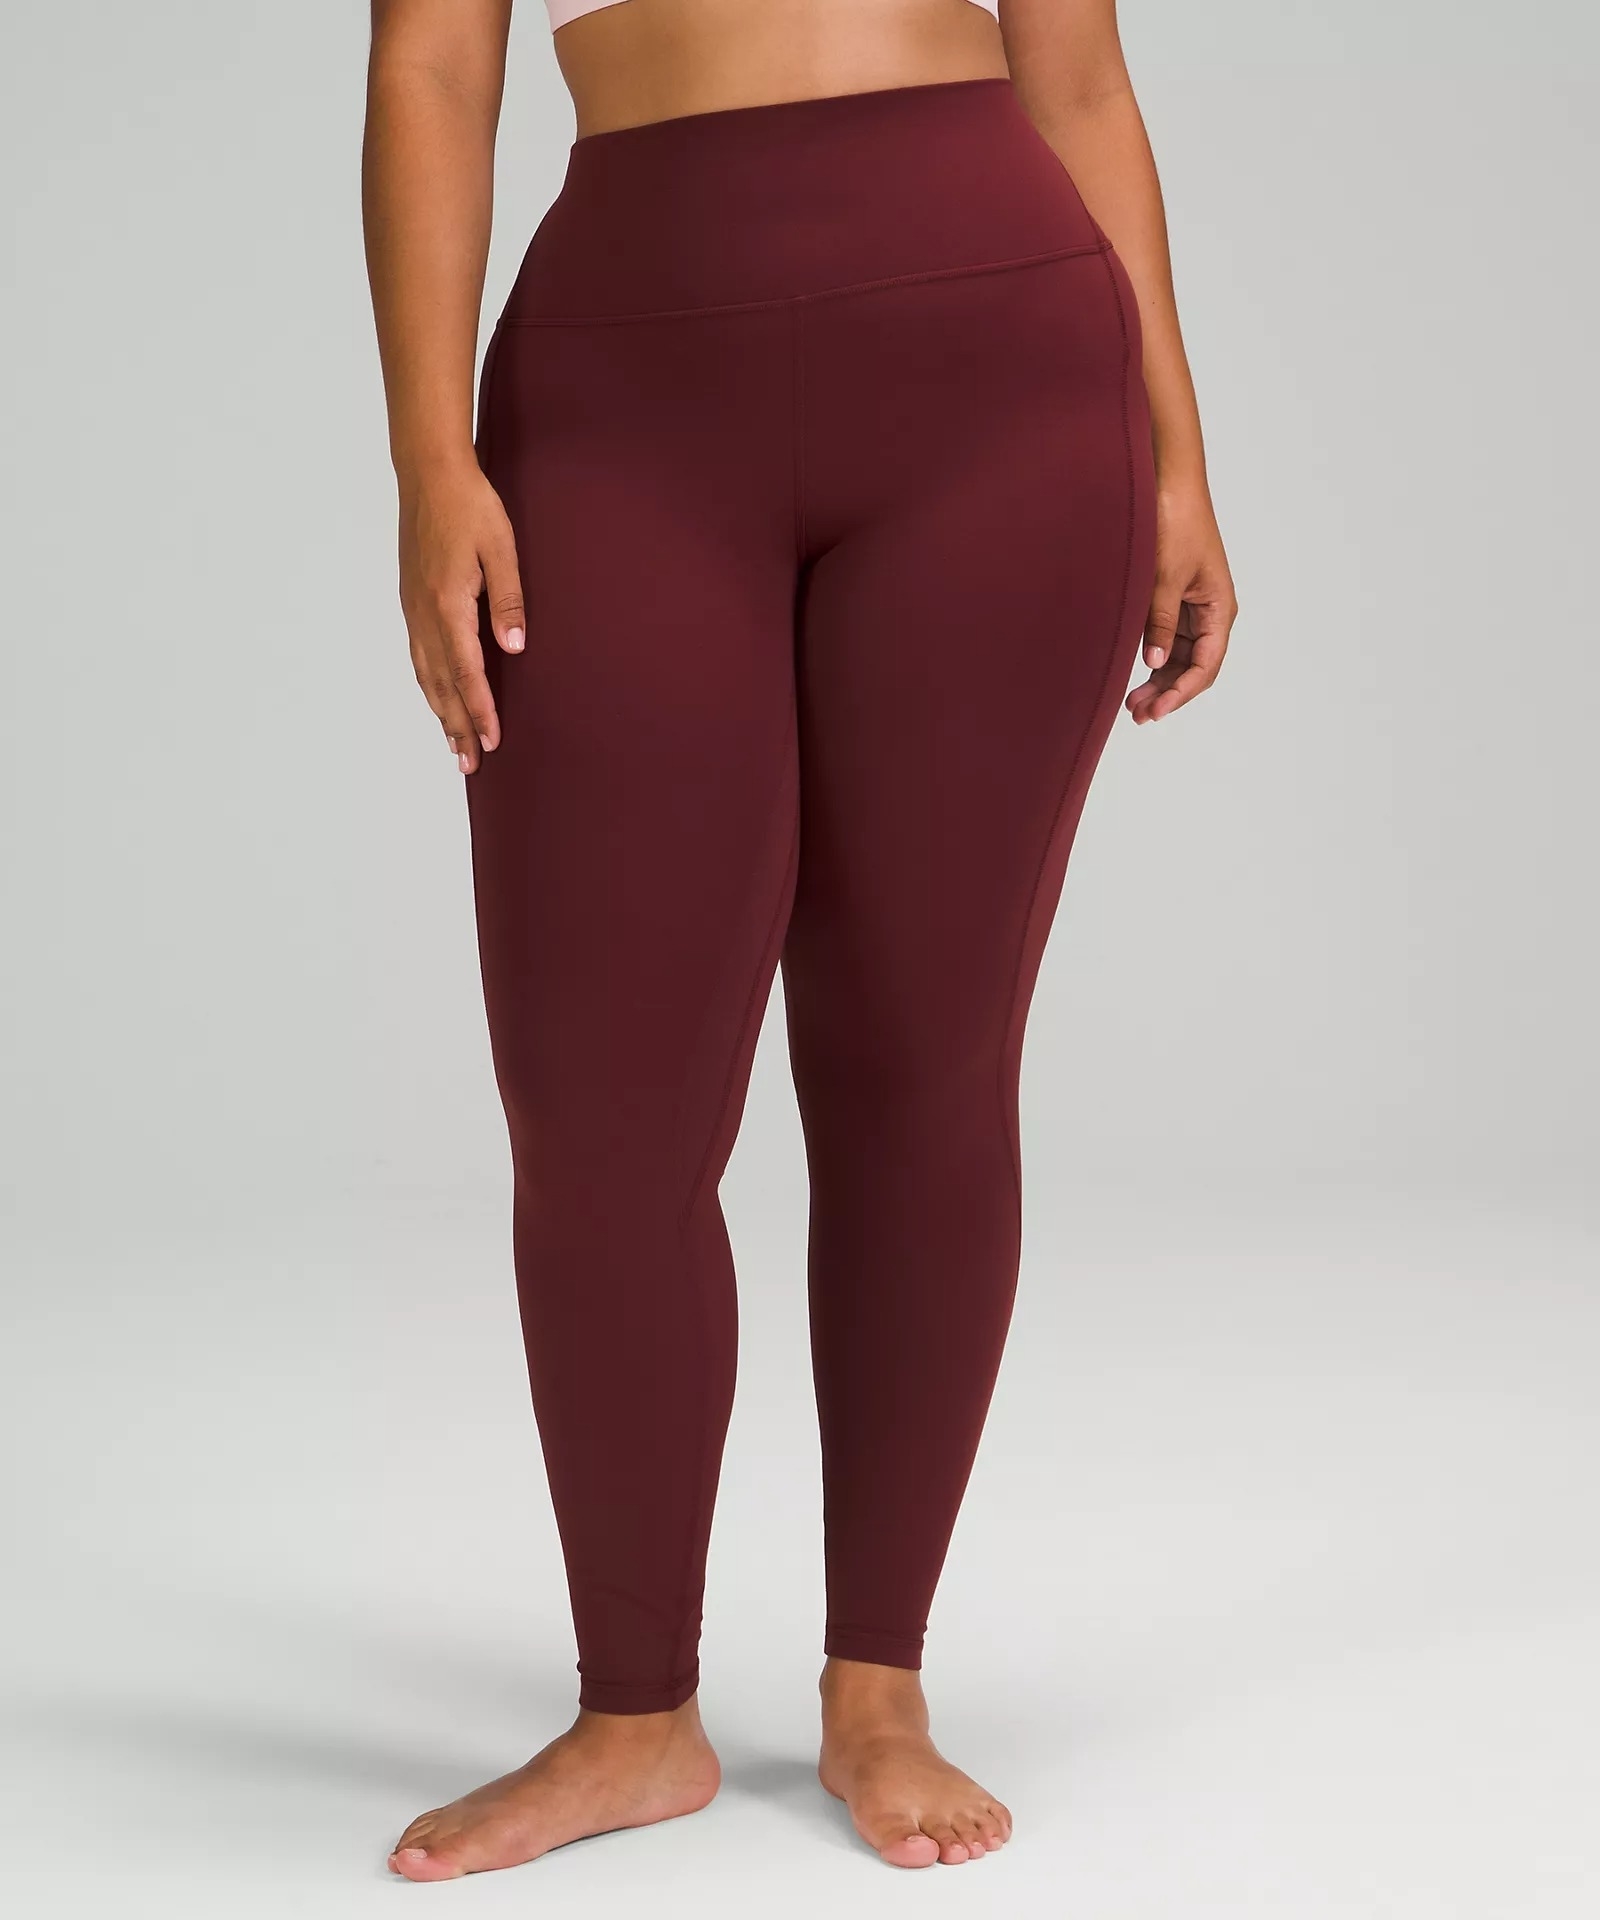 Reductress » Lululemon Yoga Pants You Can Wear Around Like You Own